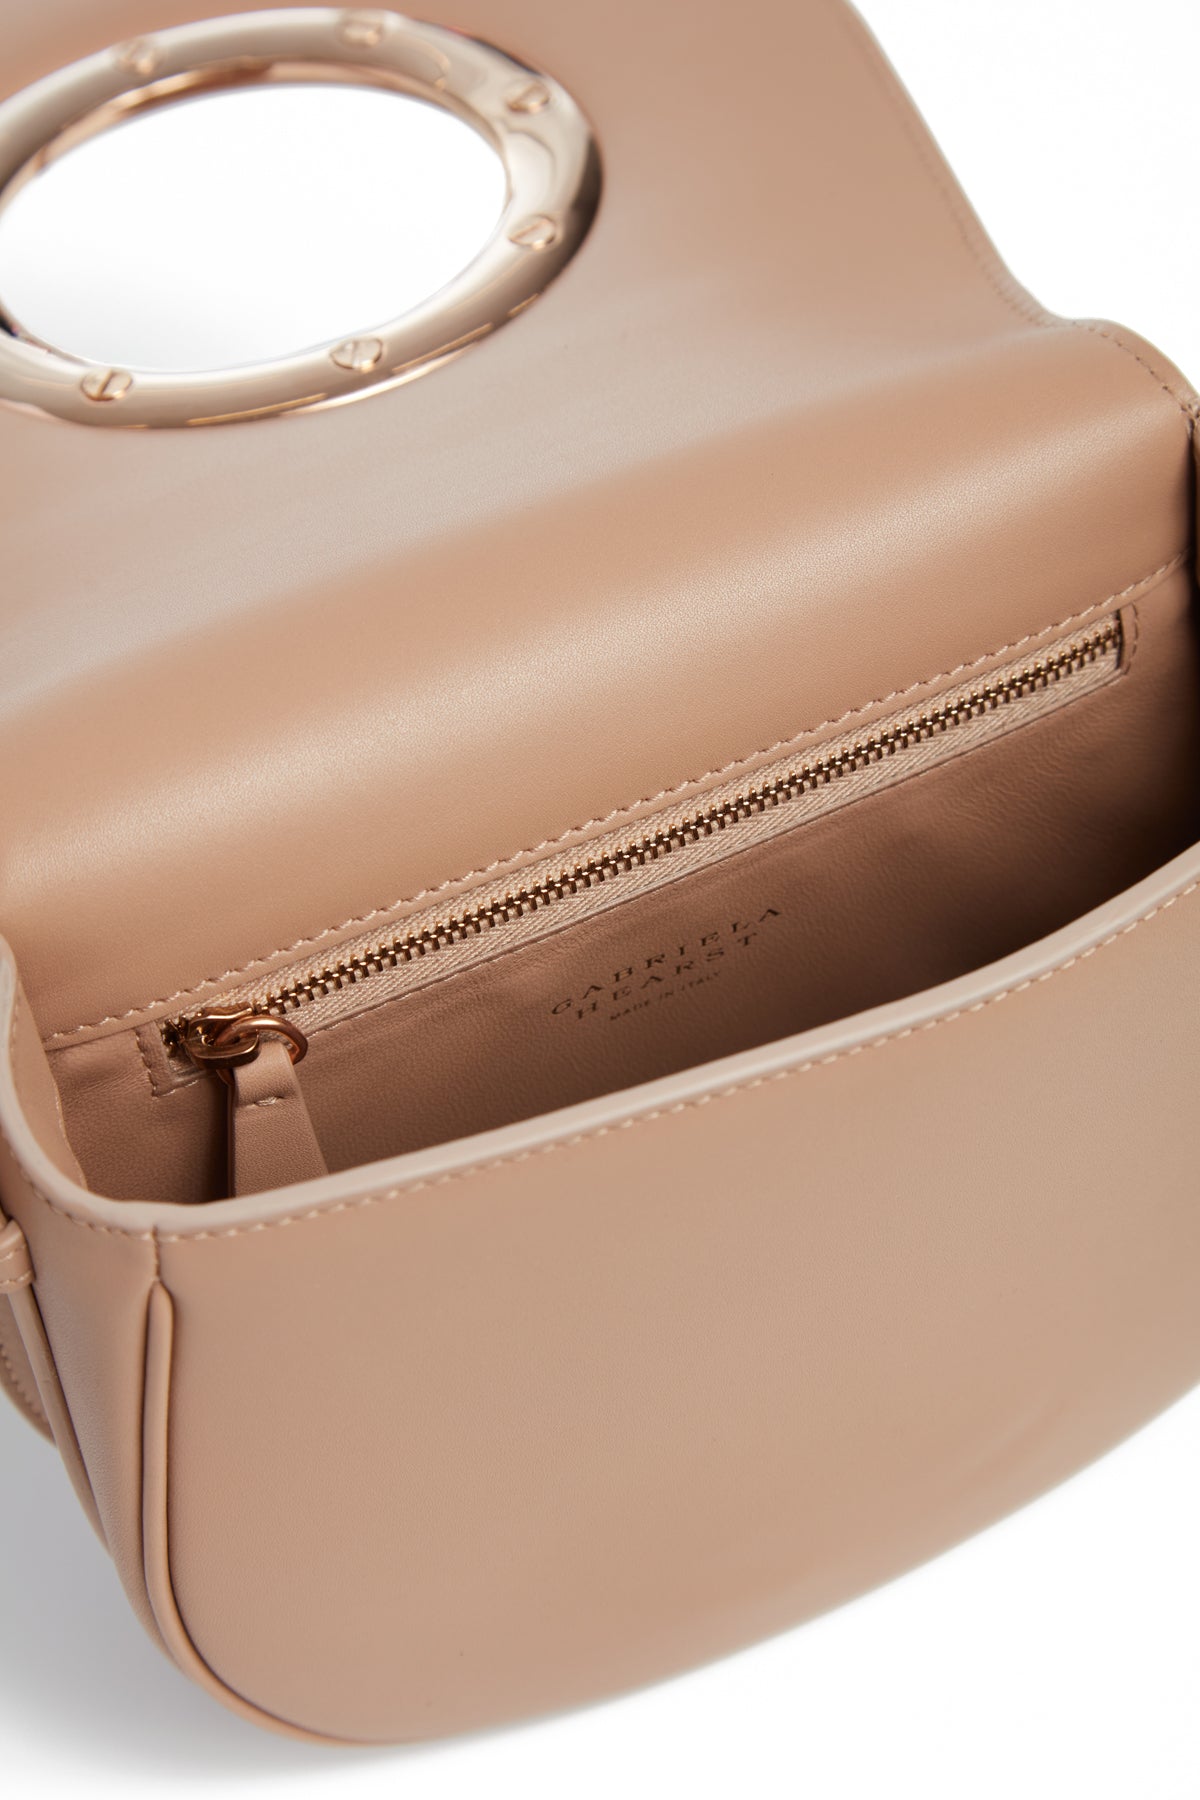 Ring Crossbody Bag in Nude Leather